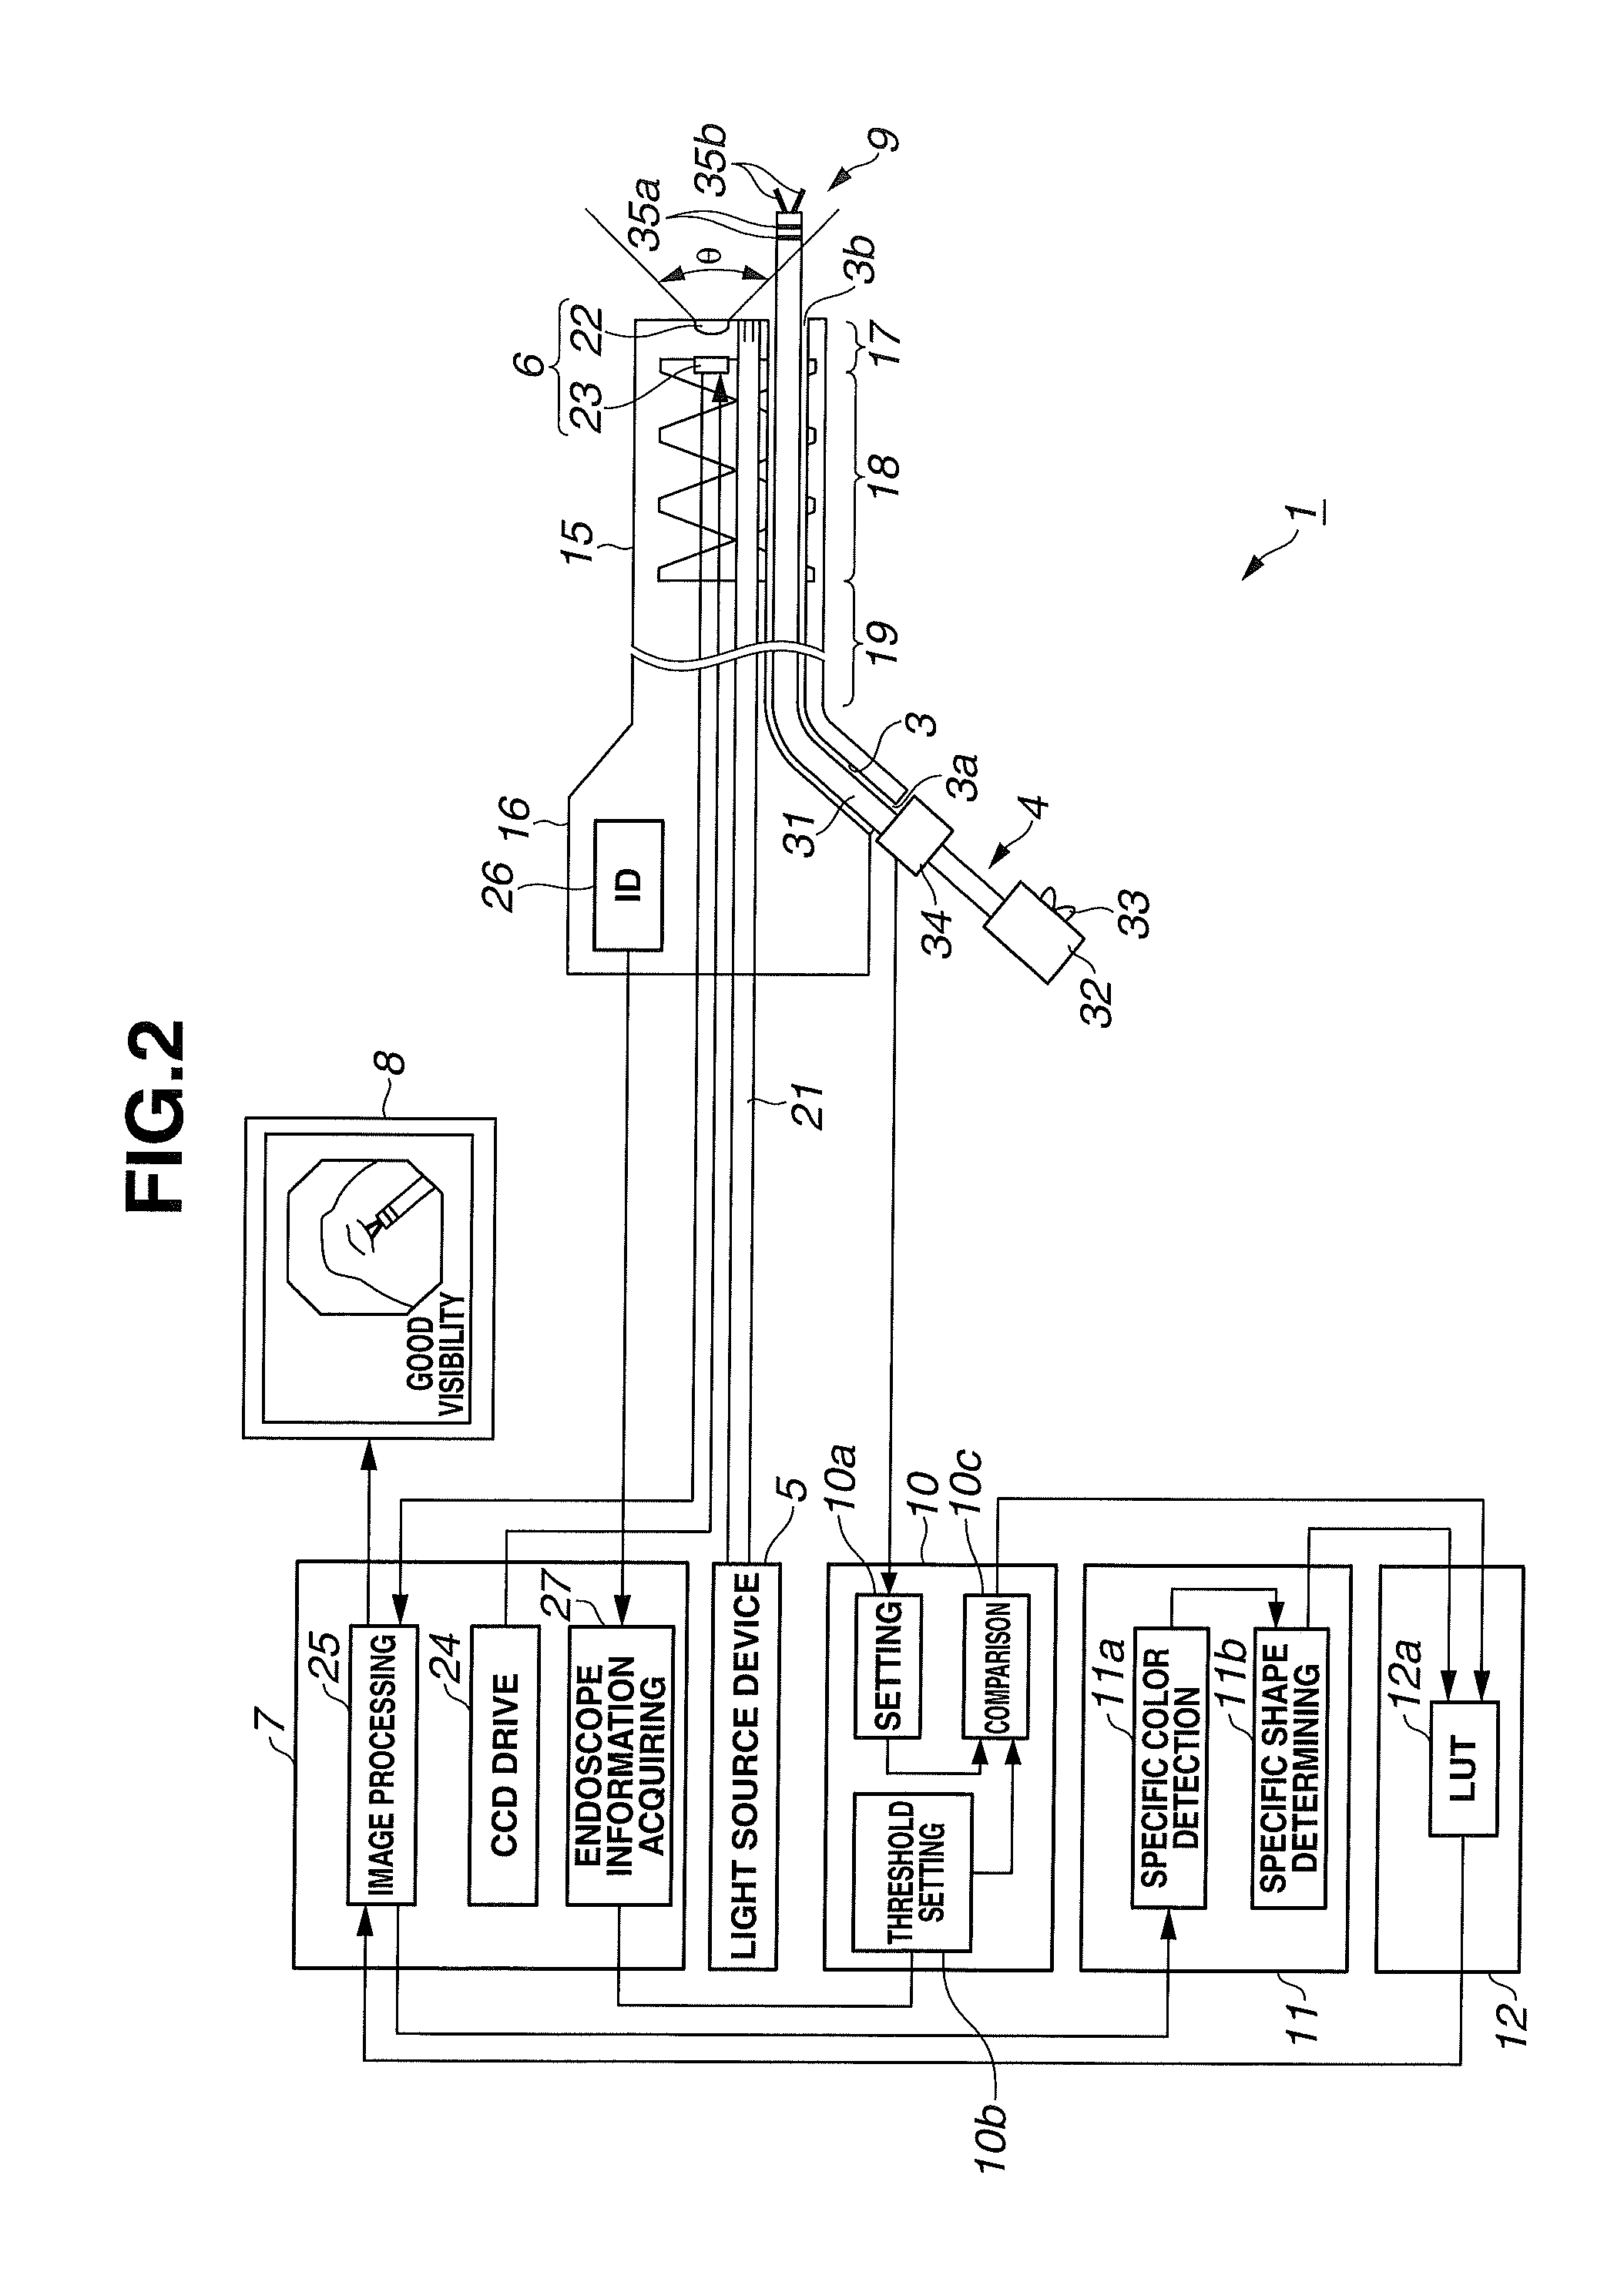 Endoscope system and low visibility determining method